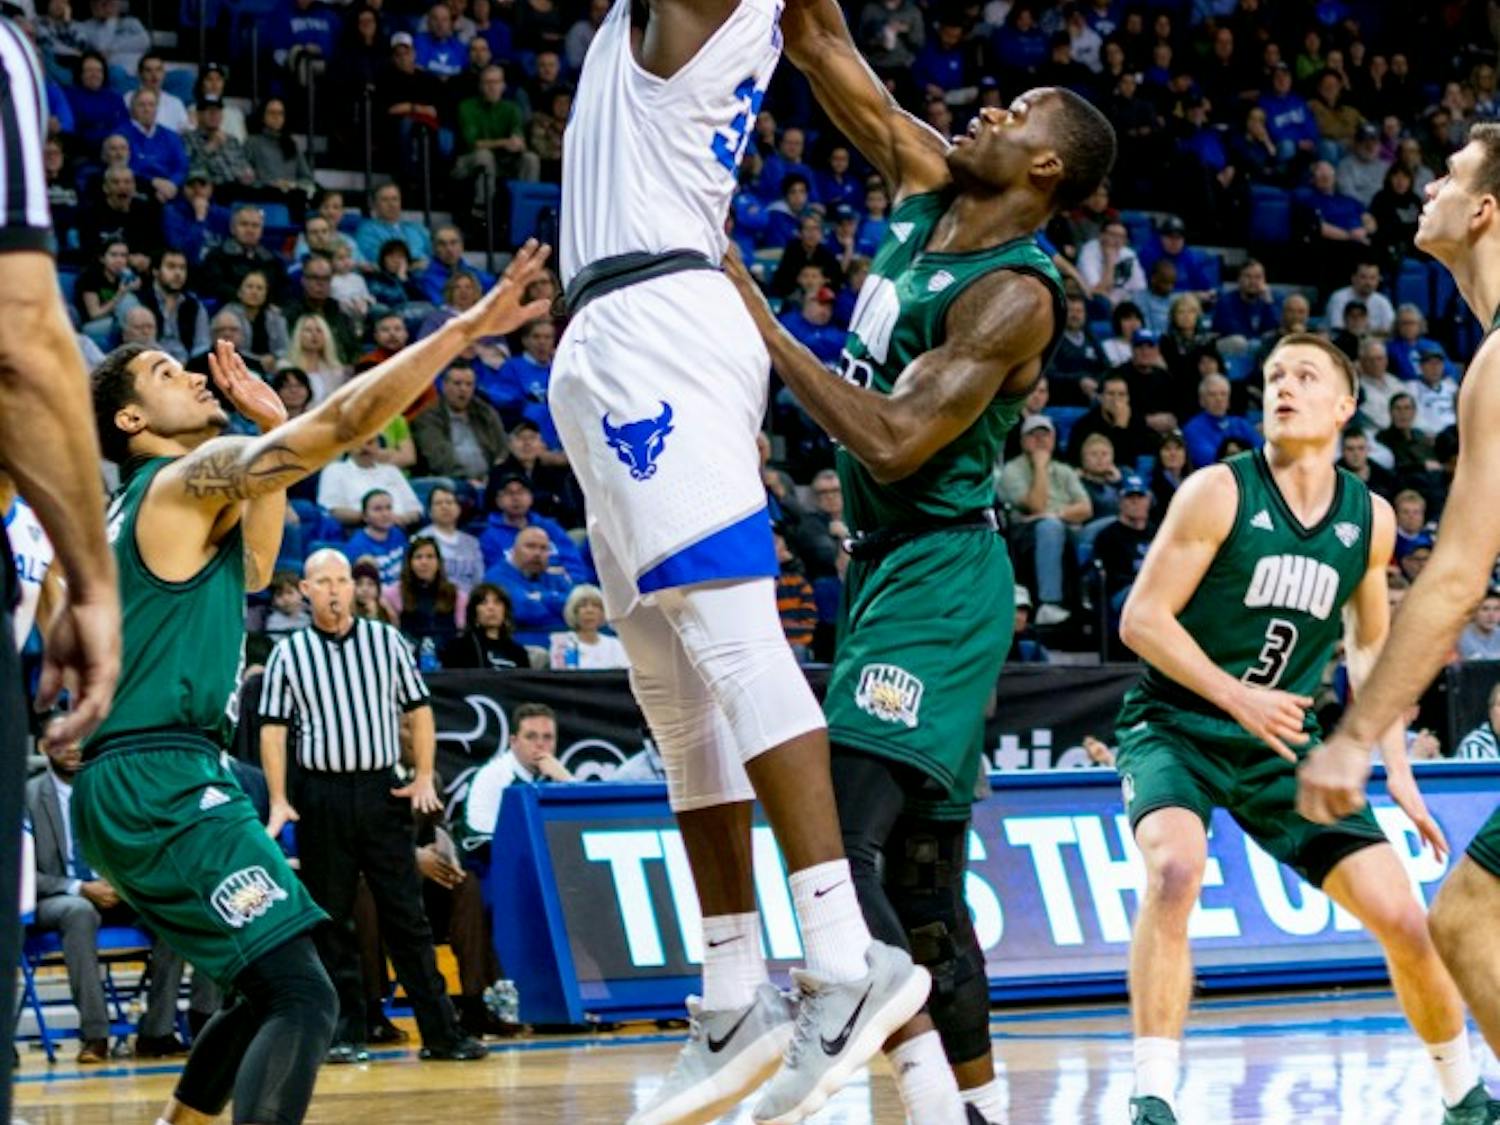 Senior forward Nick Perkins goes for a layup against Ohio. Perkins finished with 17 points during the 82-79 victory as the Bulls secured the MAC regular season championship.